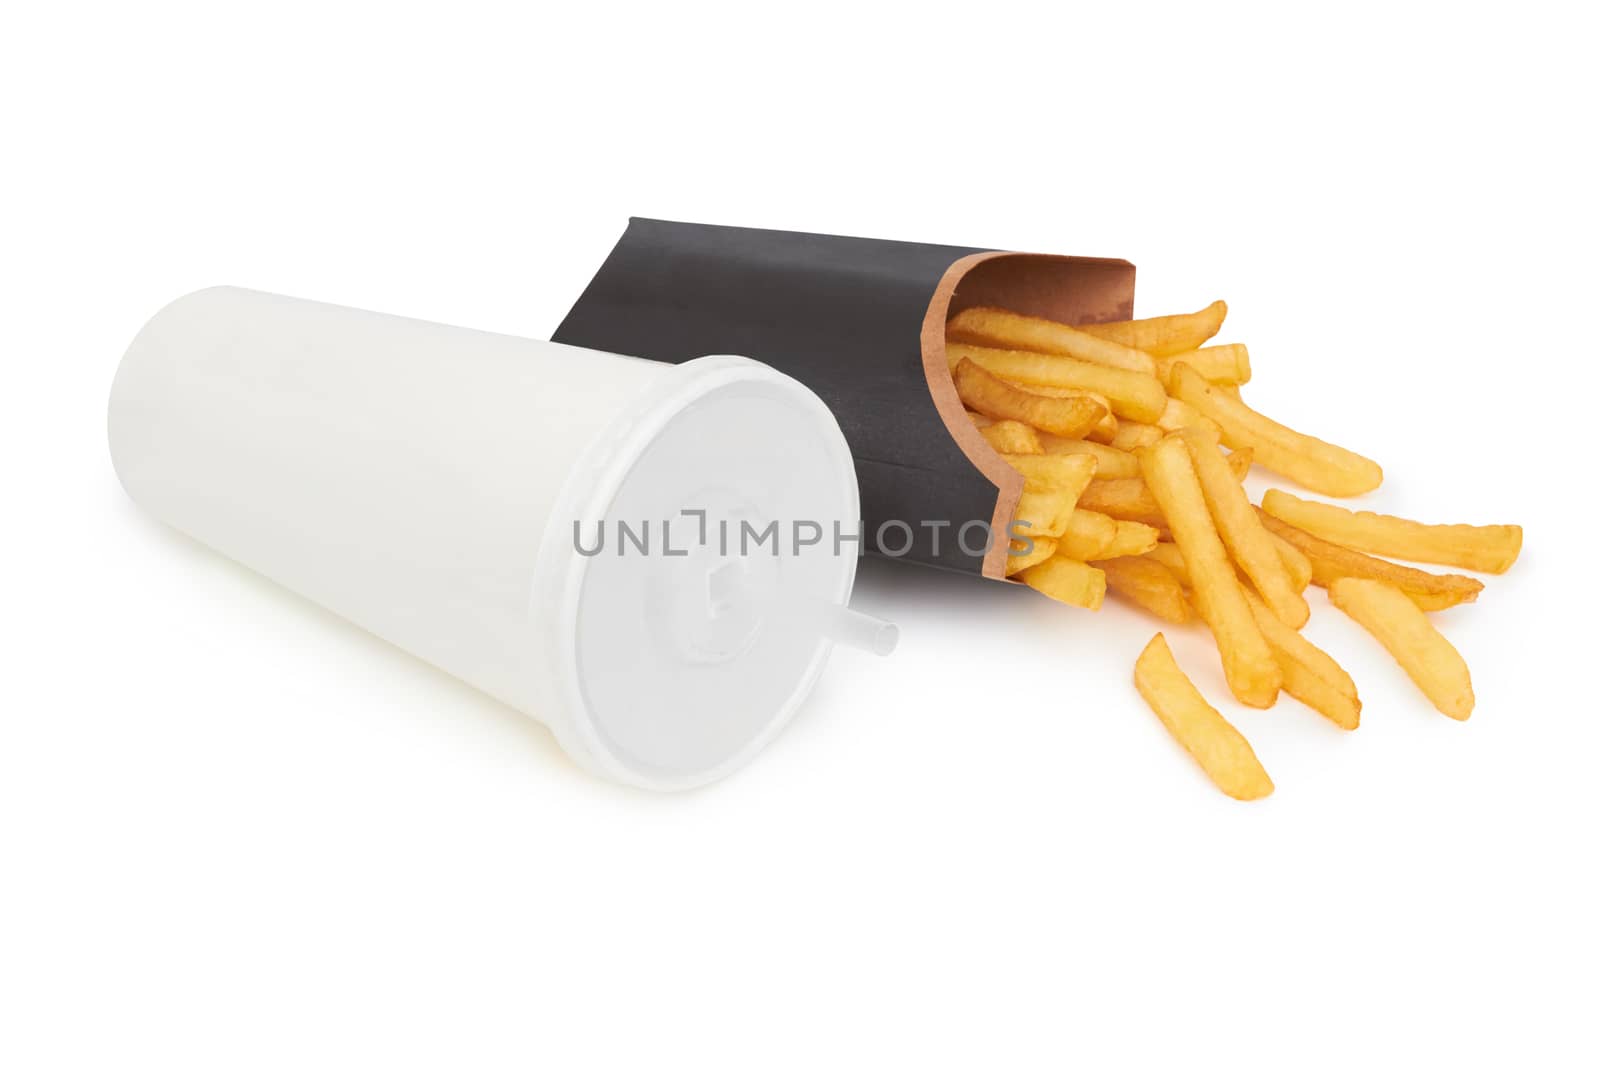 French fries in a black carton box isolated on white